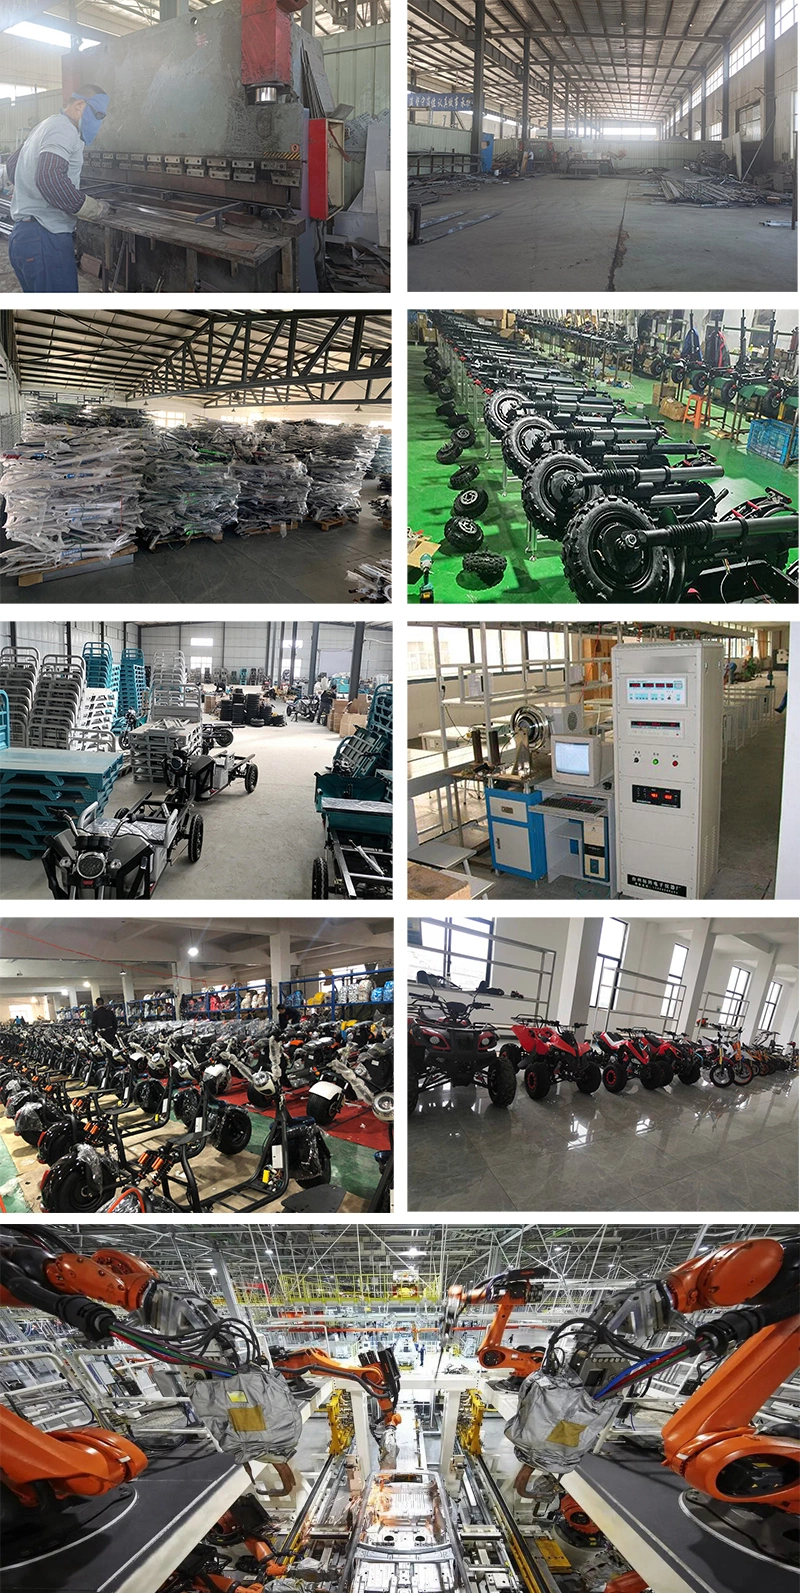 for Motorcycle Folding Baby Motorized in India Gas Passenger Senior Bike 3 Wheels Without Pedals Adult Electric Motor Tricycle